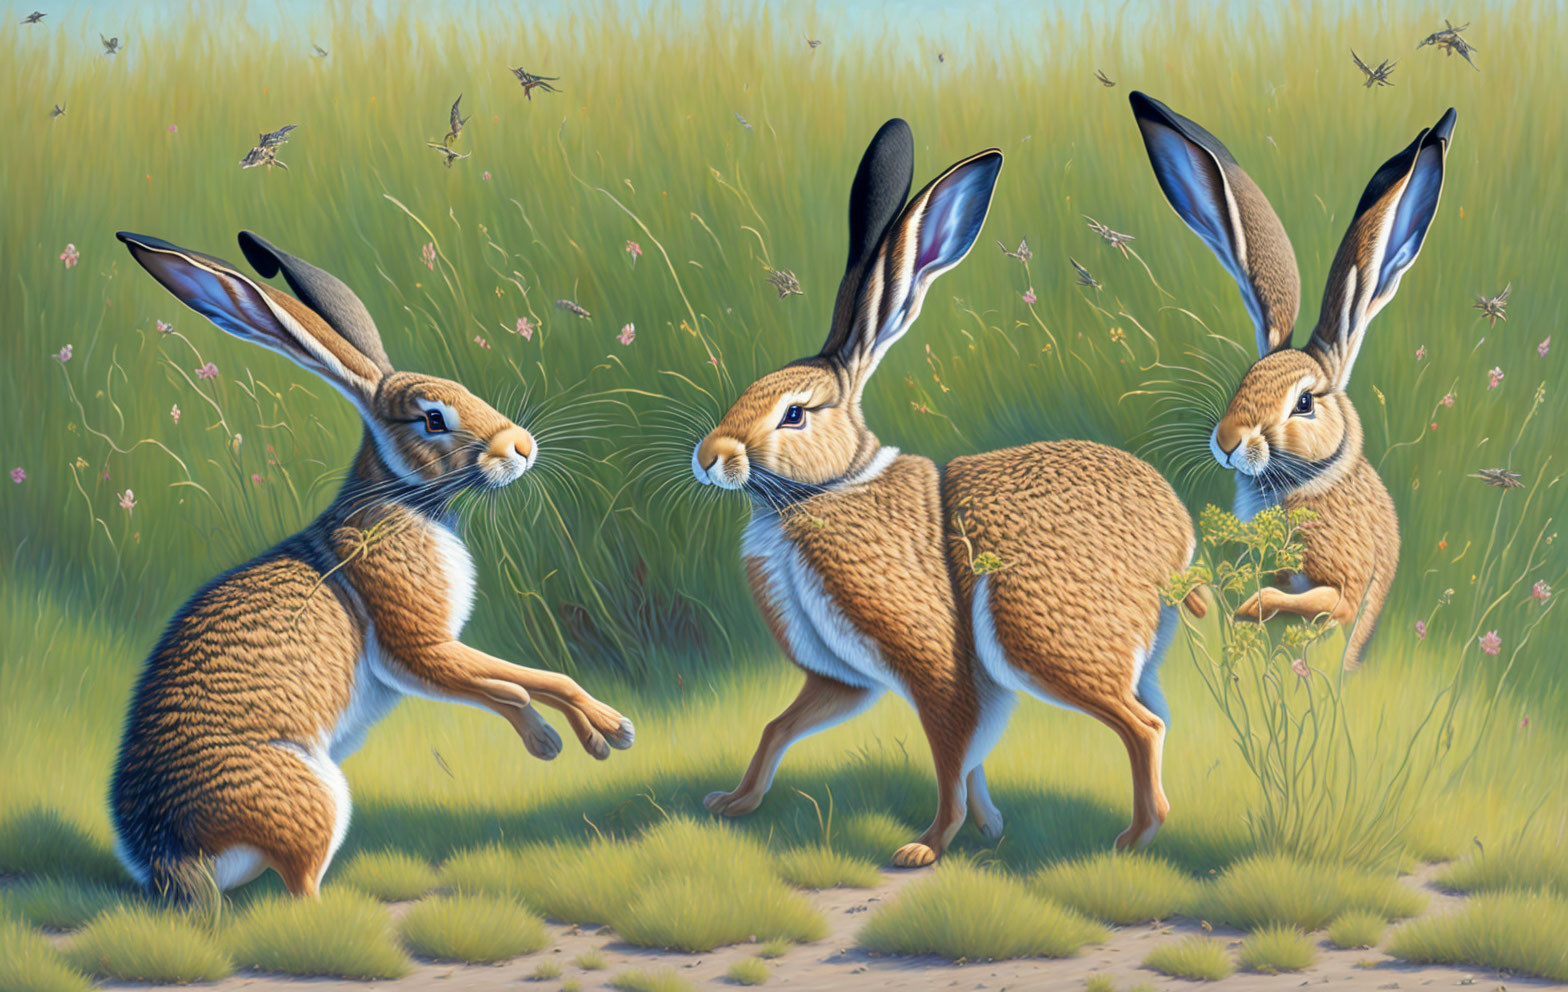 3 Hares in the Field